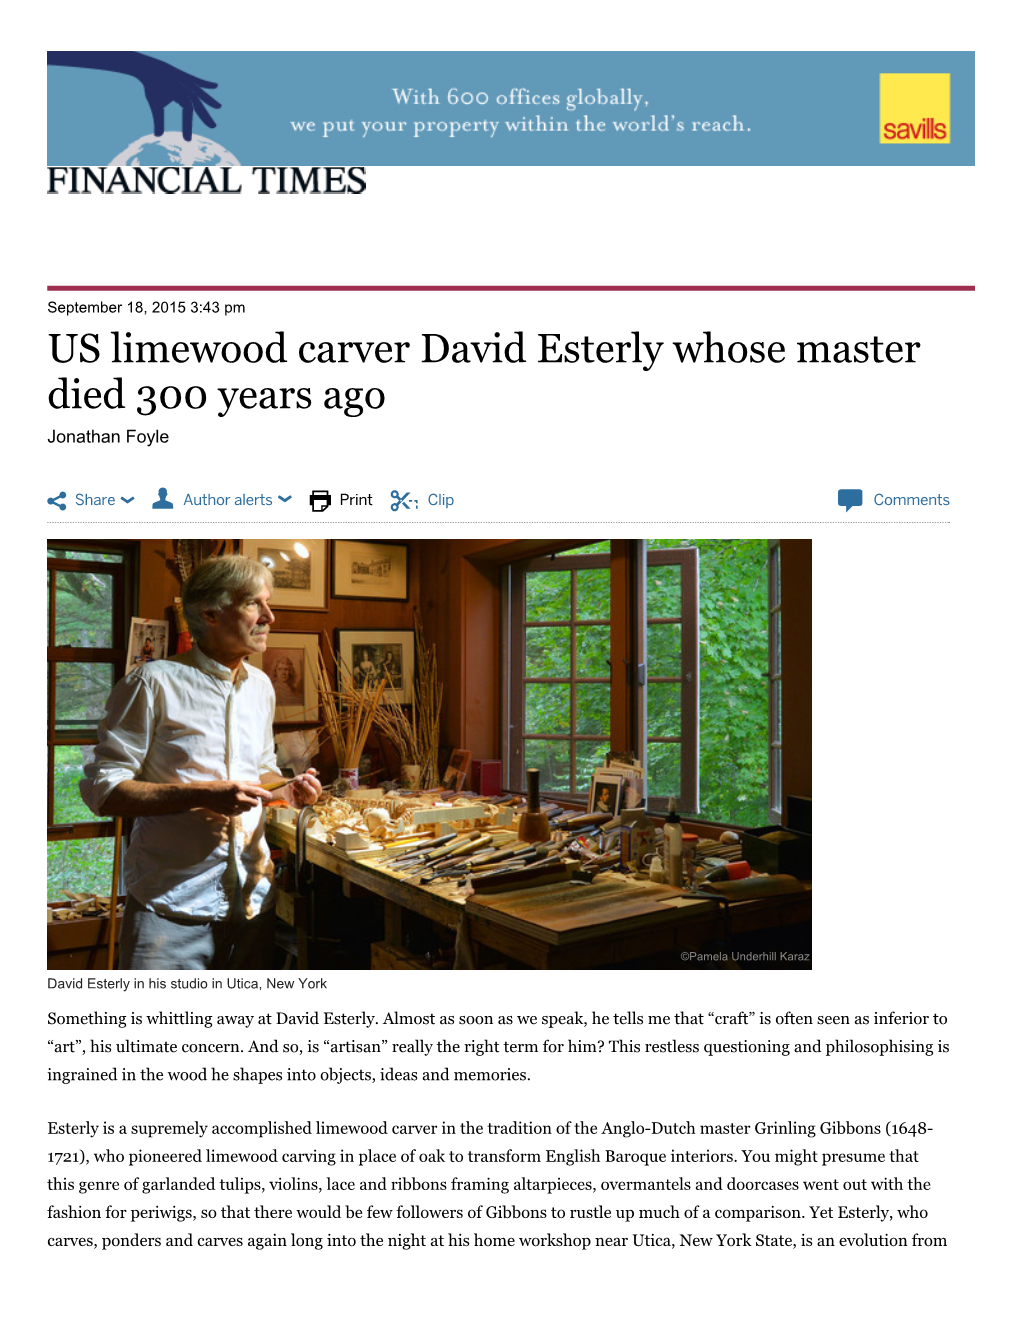 US Limewood Carver David Esterly Whose Master Died 300 Years Ago Jonathan Foyle